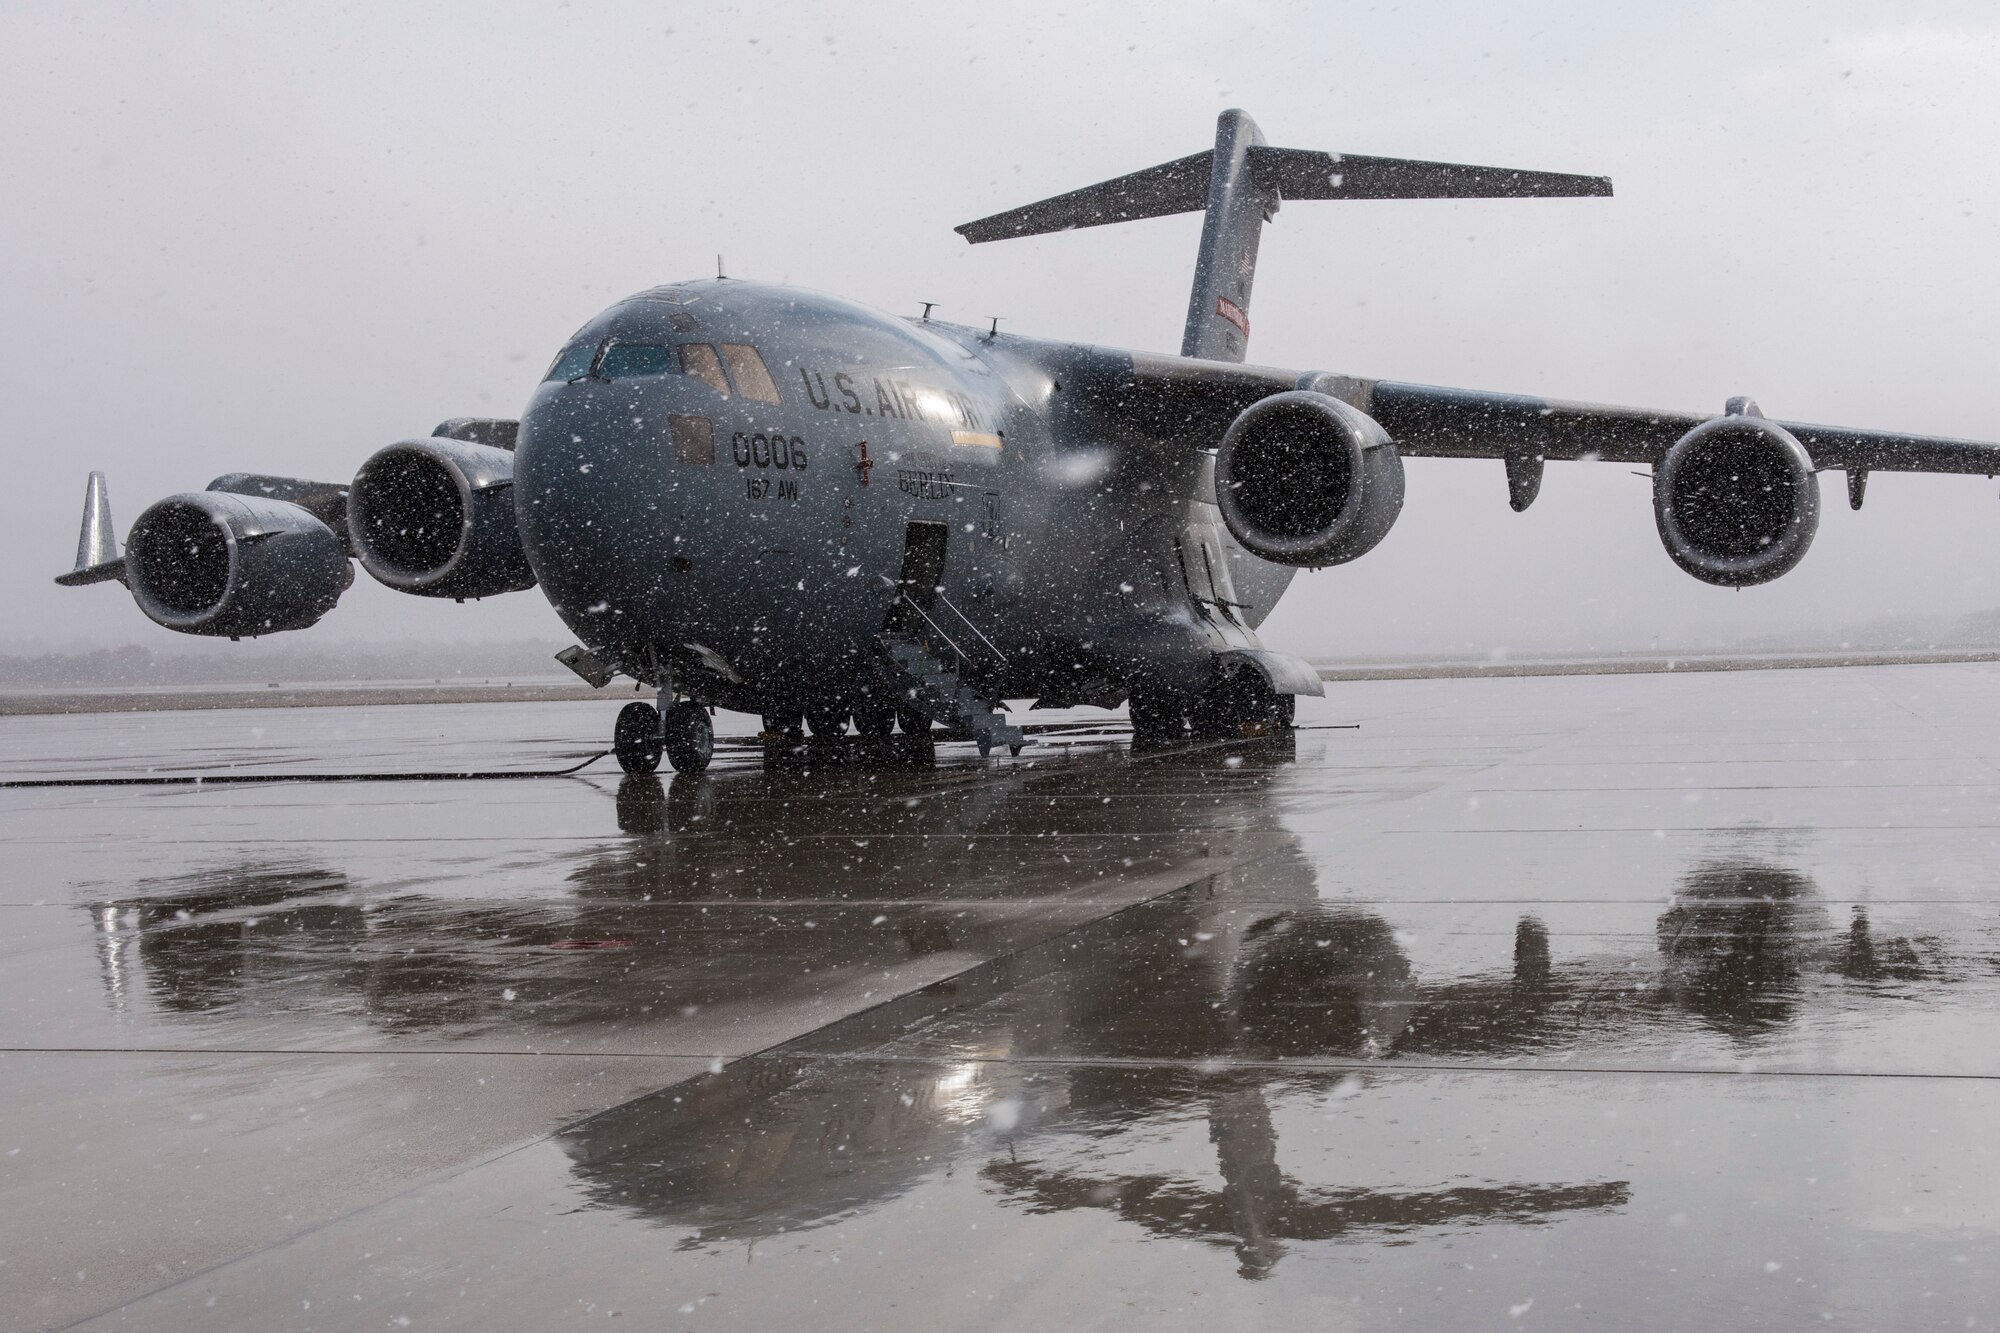 A 167th Airlift Wing C-17 Globemaster III aircraft sits onthe tarmac at the Combat Readiness Training Center in Alpena, Mich., Nov. 5, 2019. Approximately 300 members of the 167th Airlift Wing deployed to the training base, Nov. 3-7, for a full-scale readiness exercise. (U.S. Air National Guard photo by Senior Master Sgt. Emily Beightol-Deyerle)